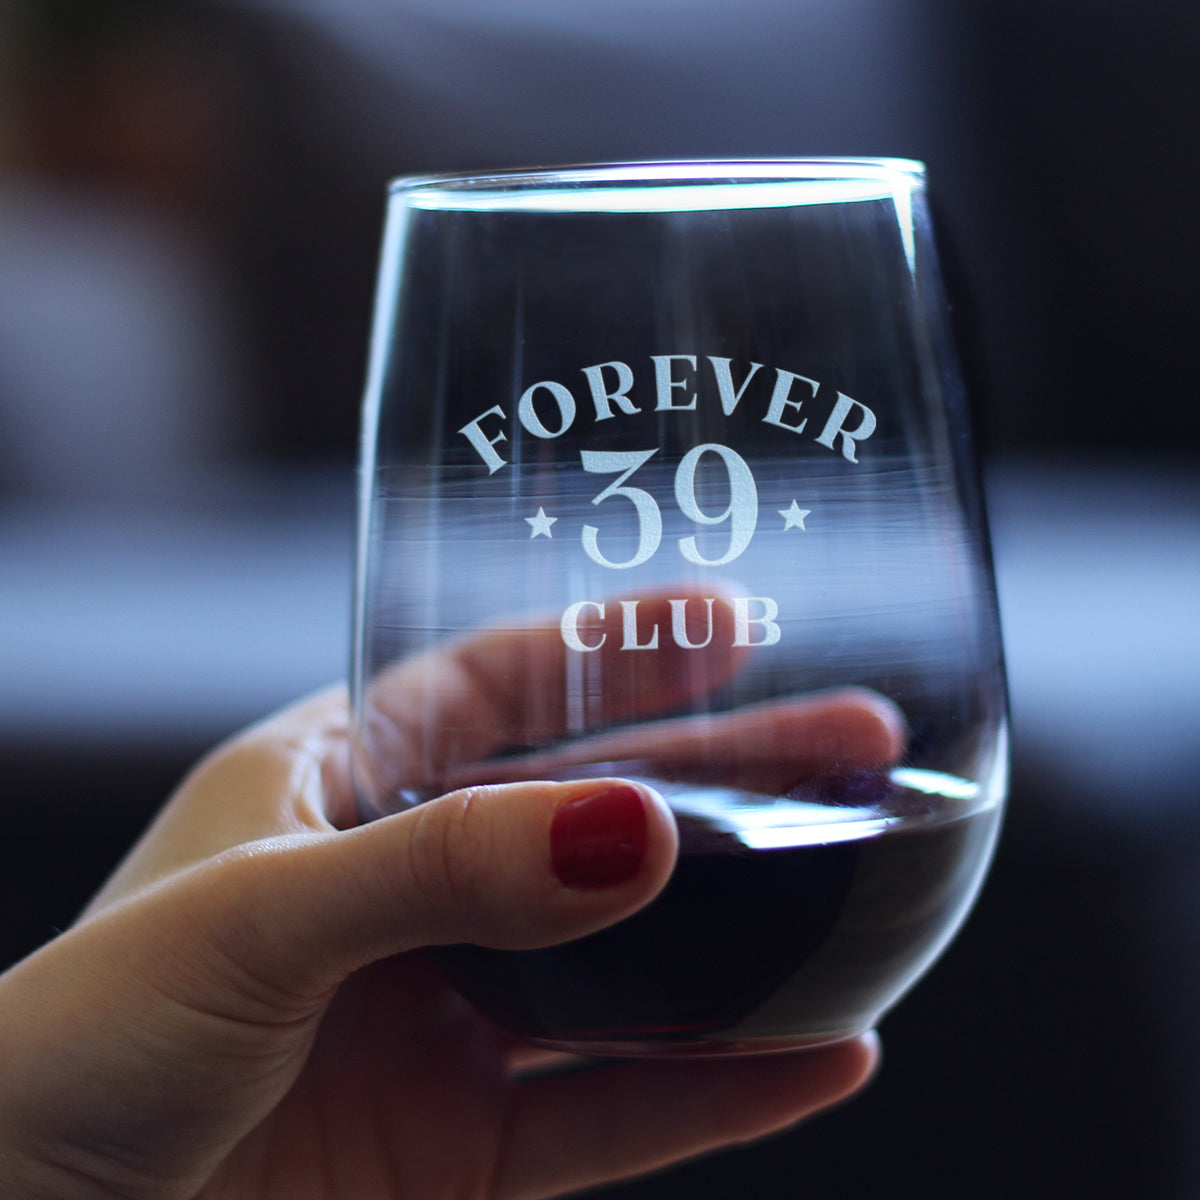 Forever 39 Club - Stemless Wine Glass 40th Birthday Gifts for Women &amp; Men Turning 40 - Bday Party Decor - Large 17 Oz Glasses